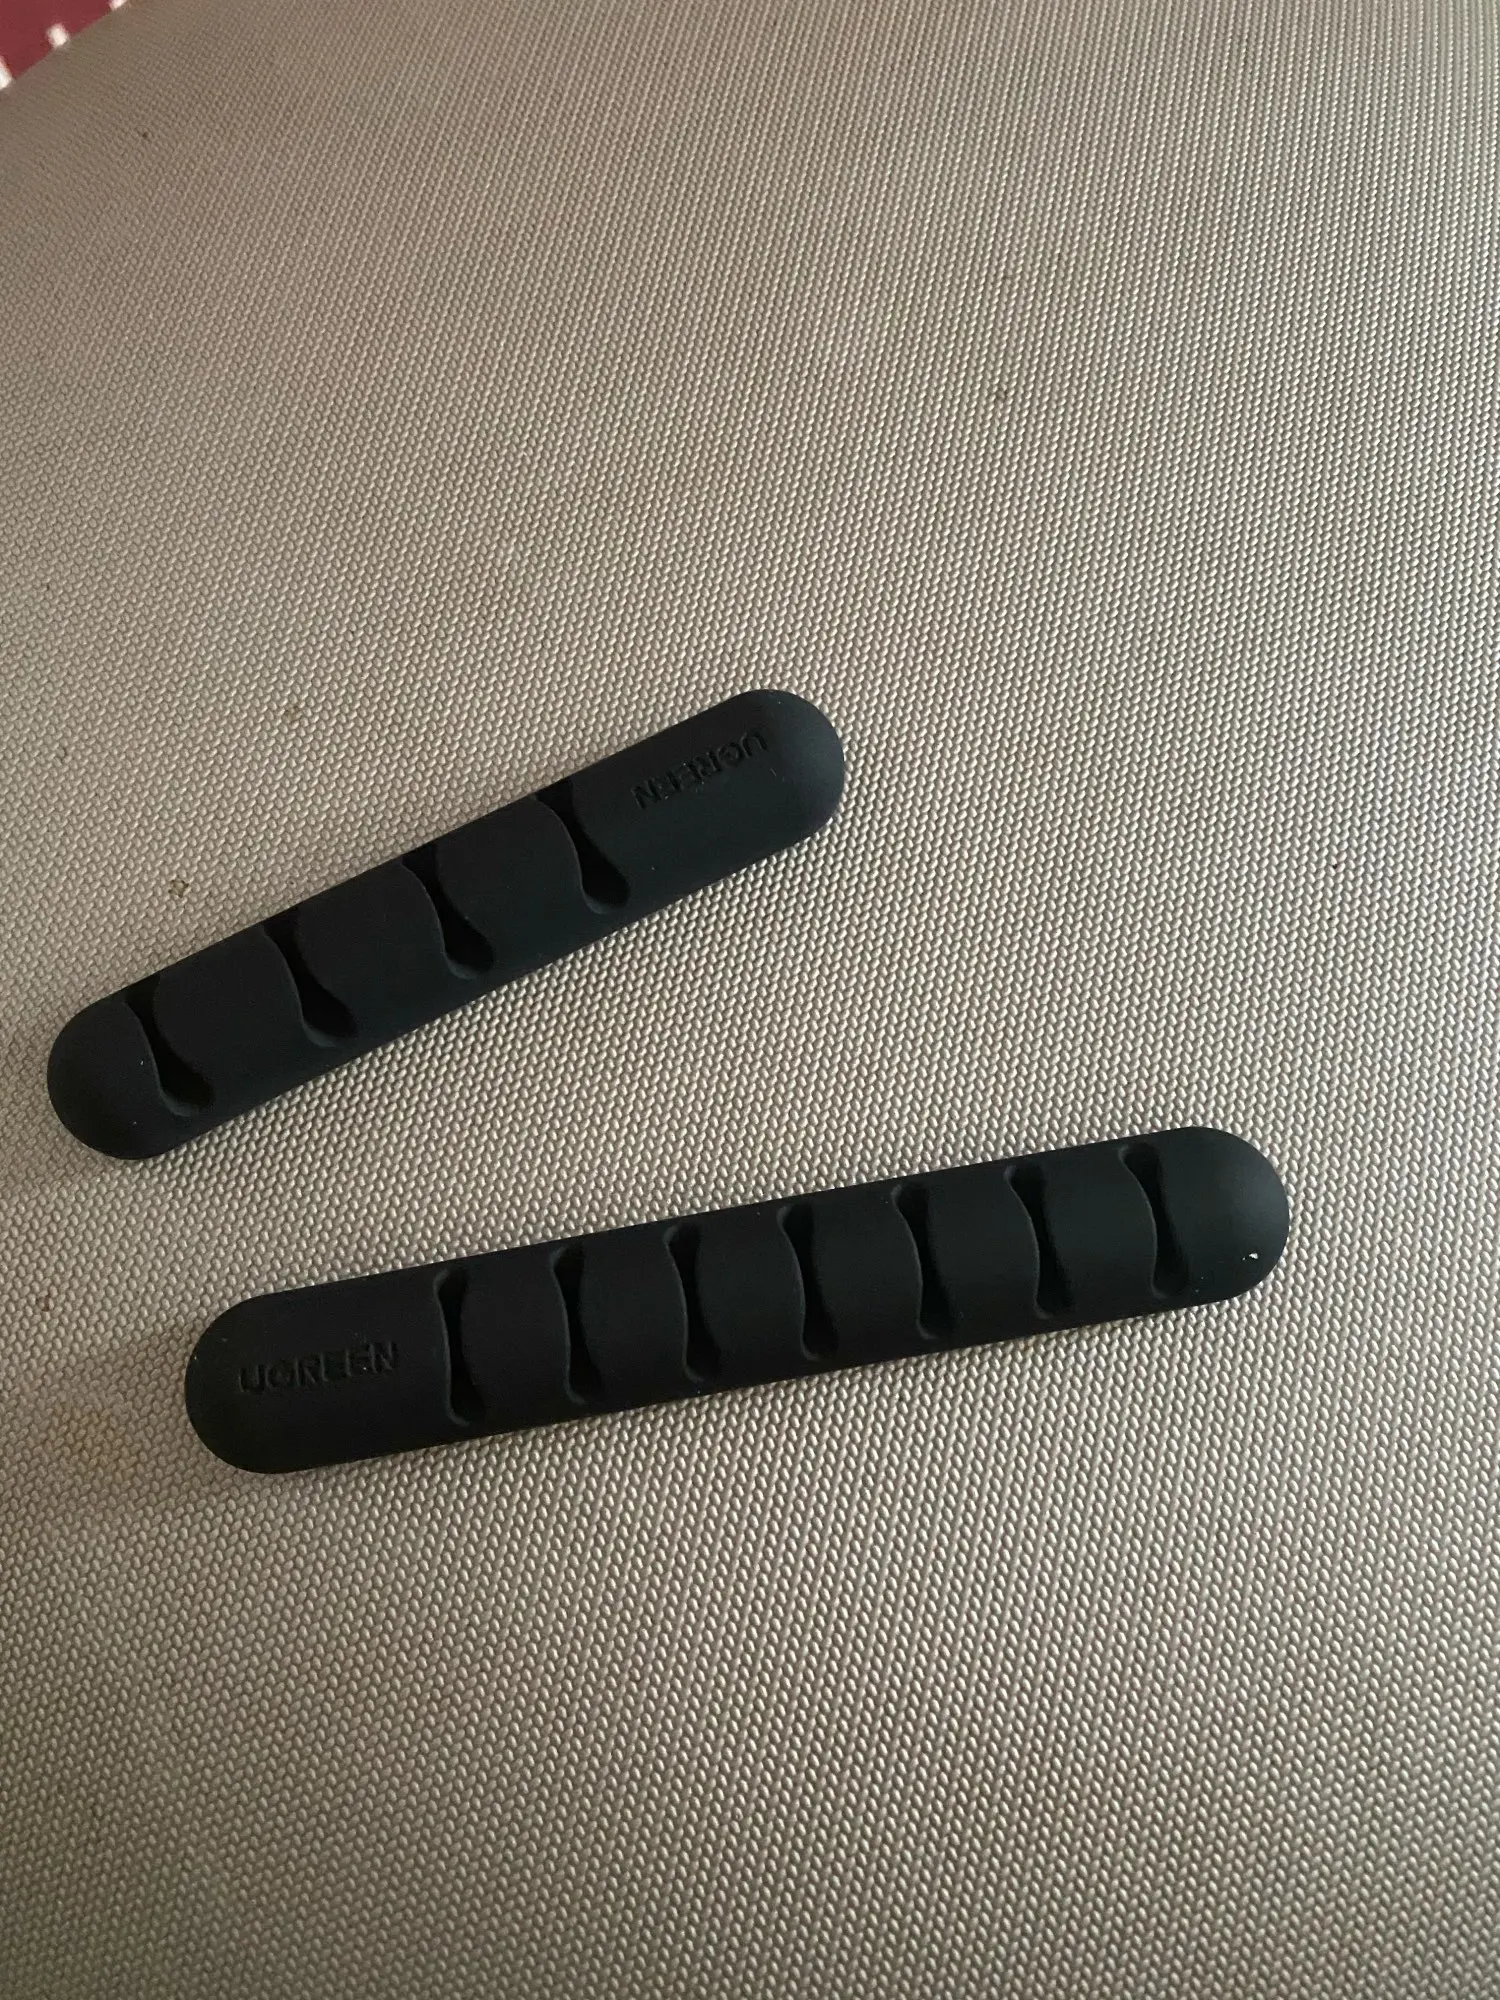 Silicone Cable Holder Clips photo review